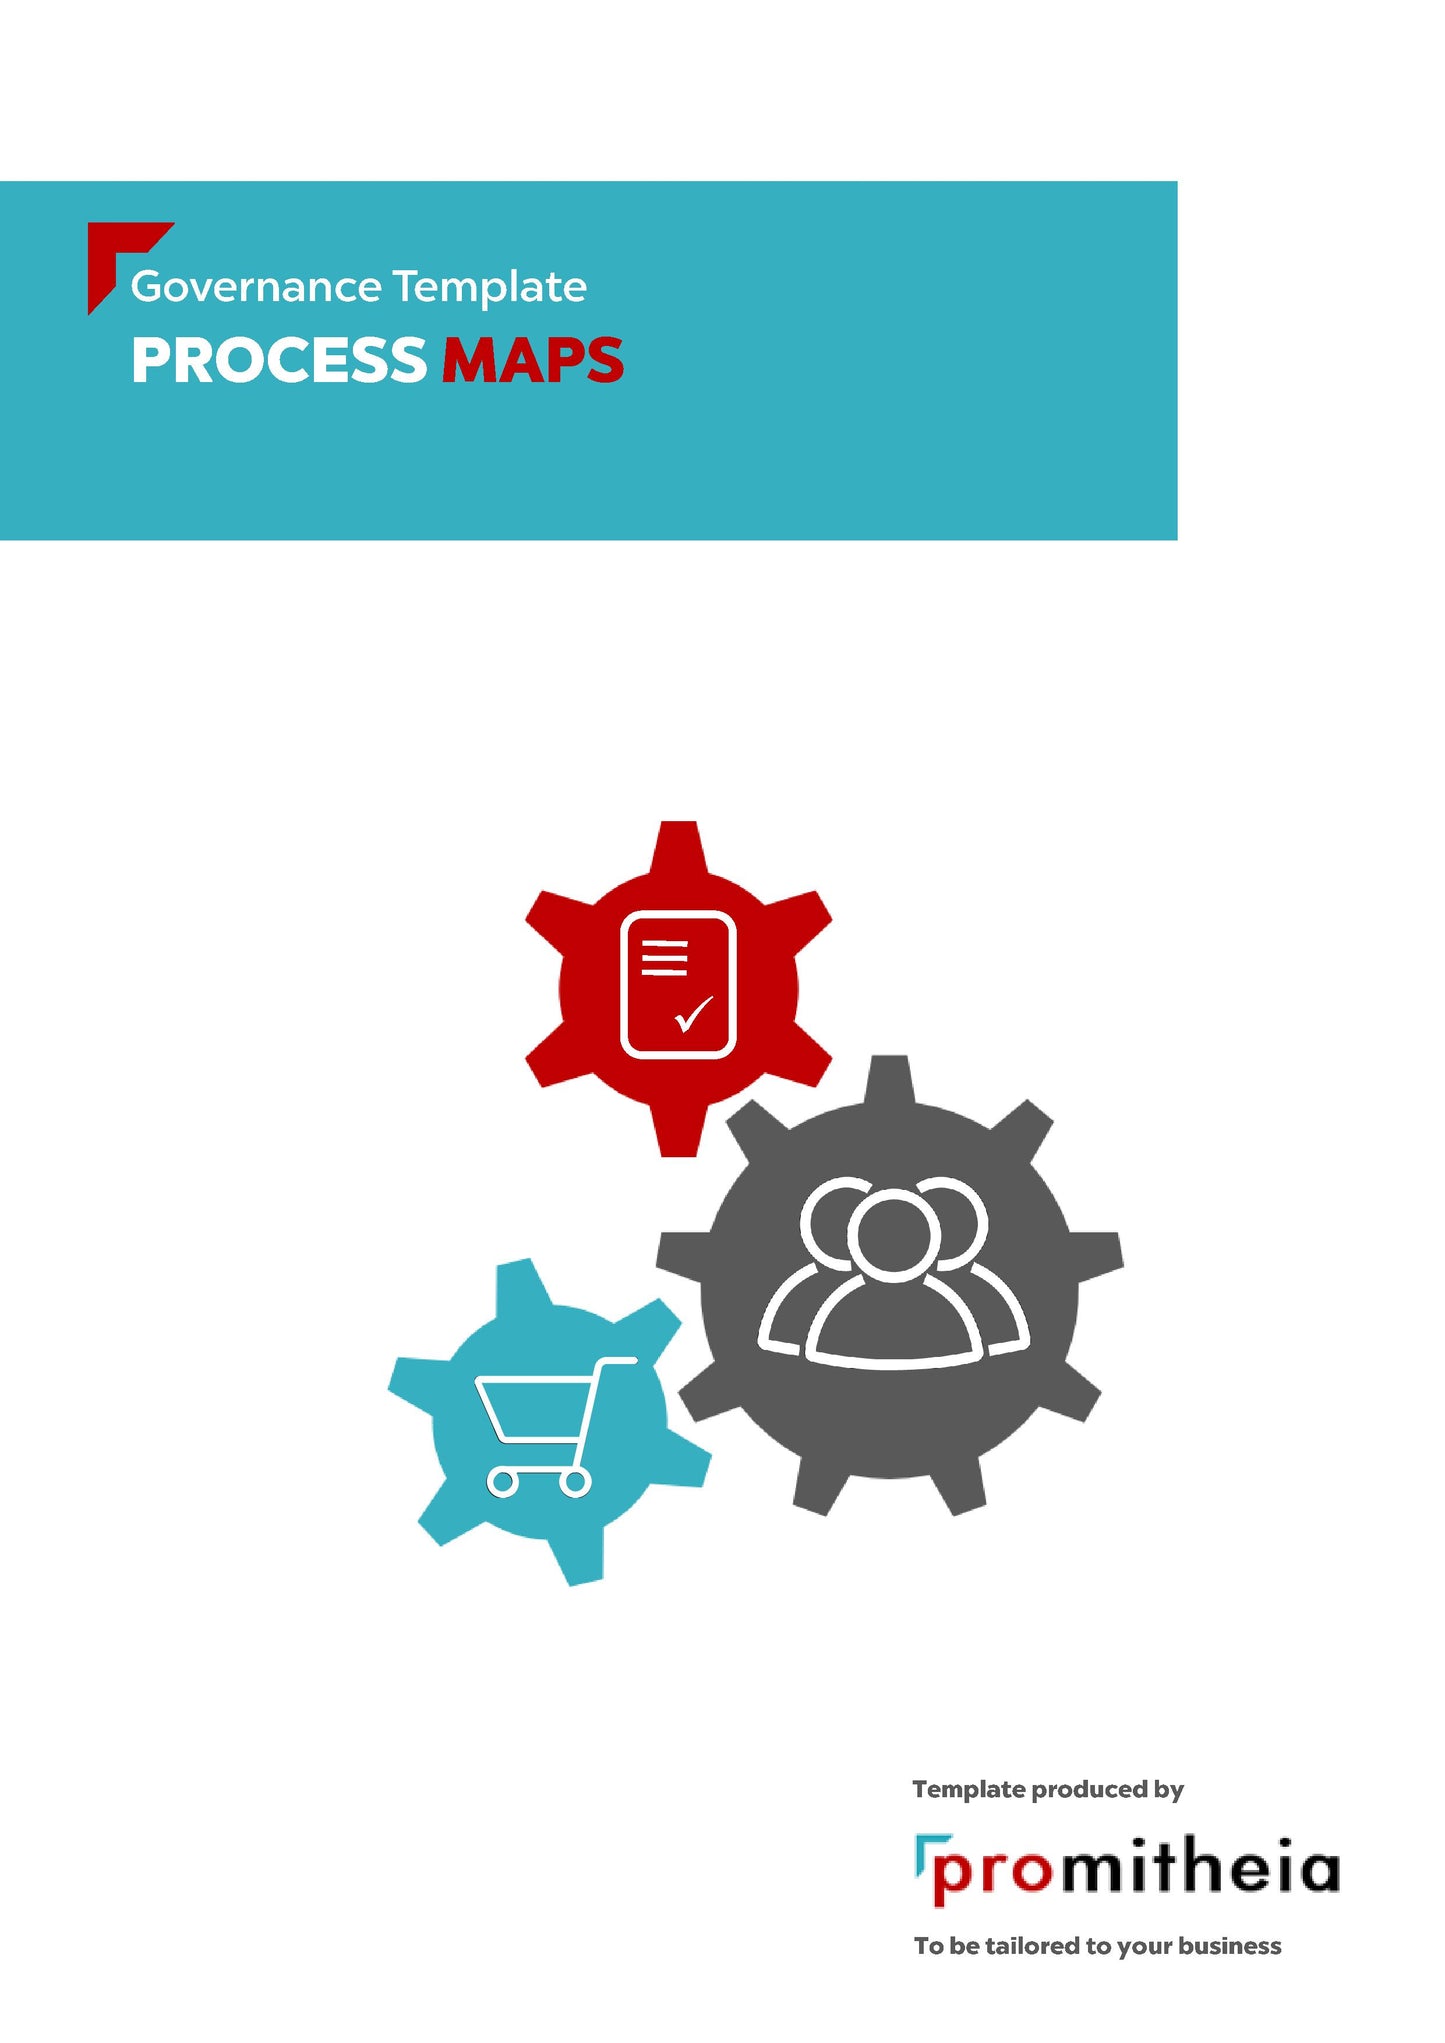 Process Maps - High Value, Operational, Low Value